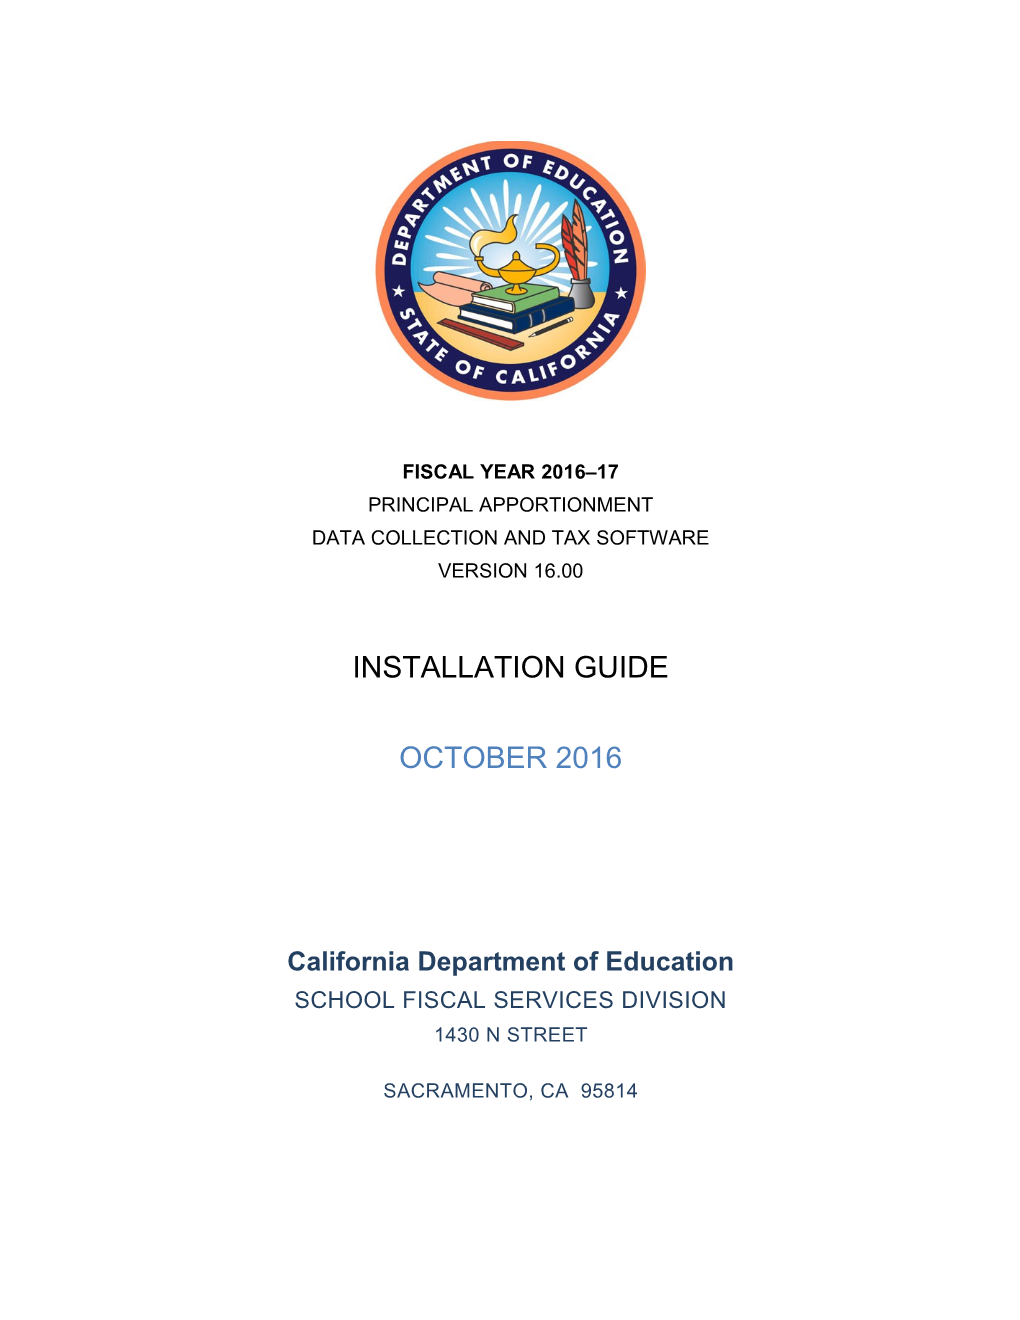 PA Software Install Guide, FY 2016-17 - Principal Apportionment (CA Dept Of Education)